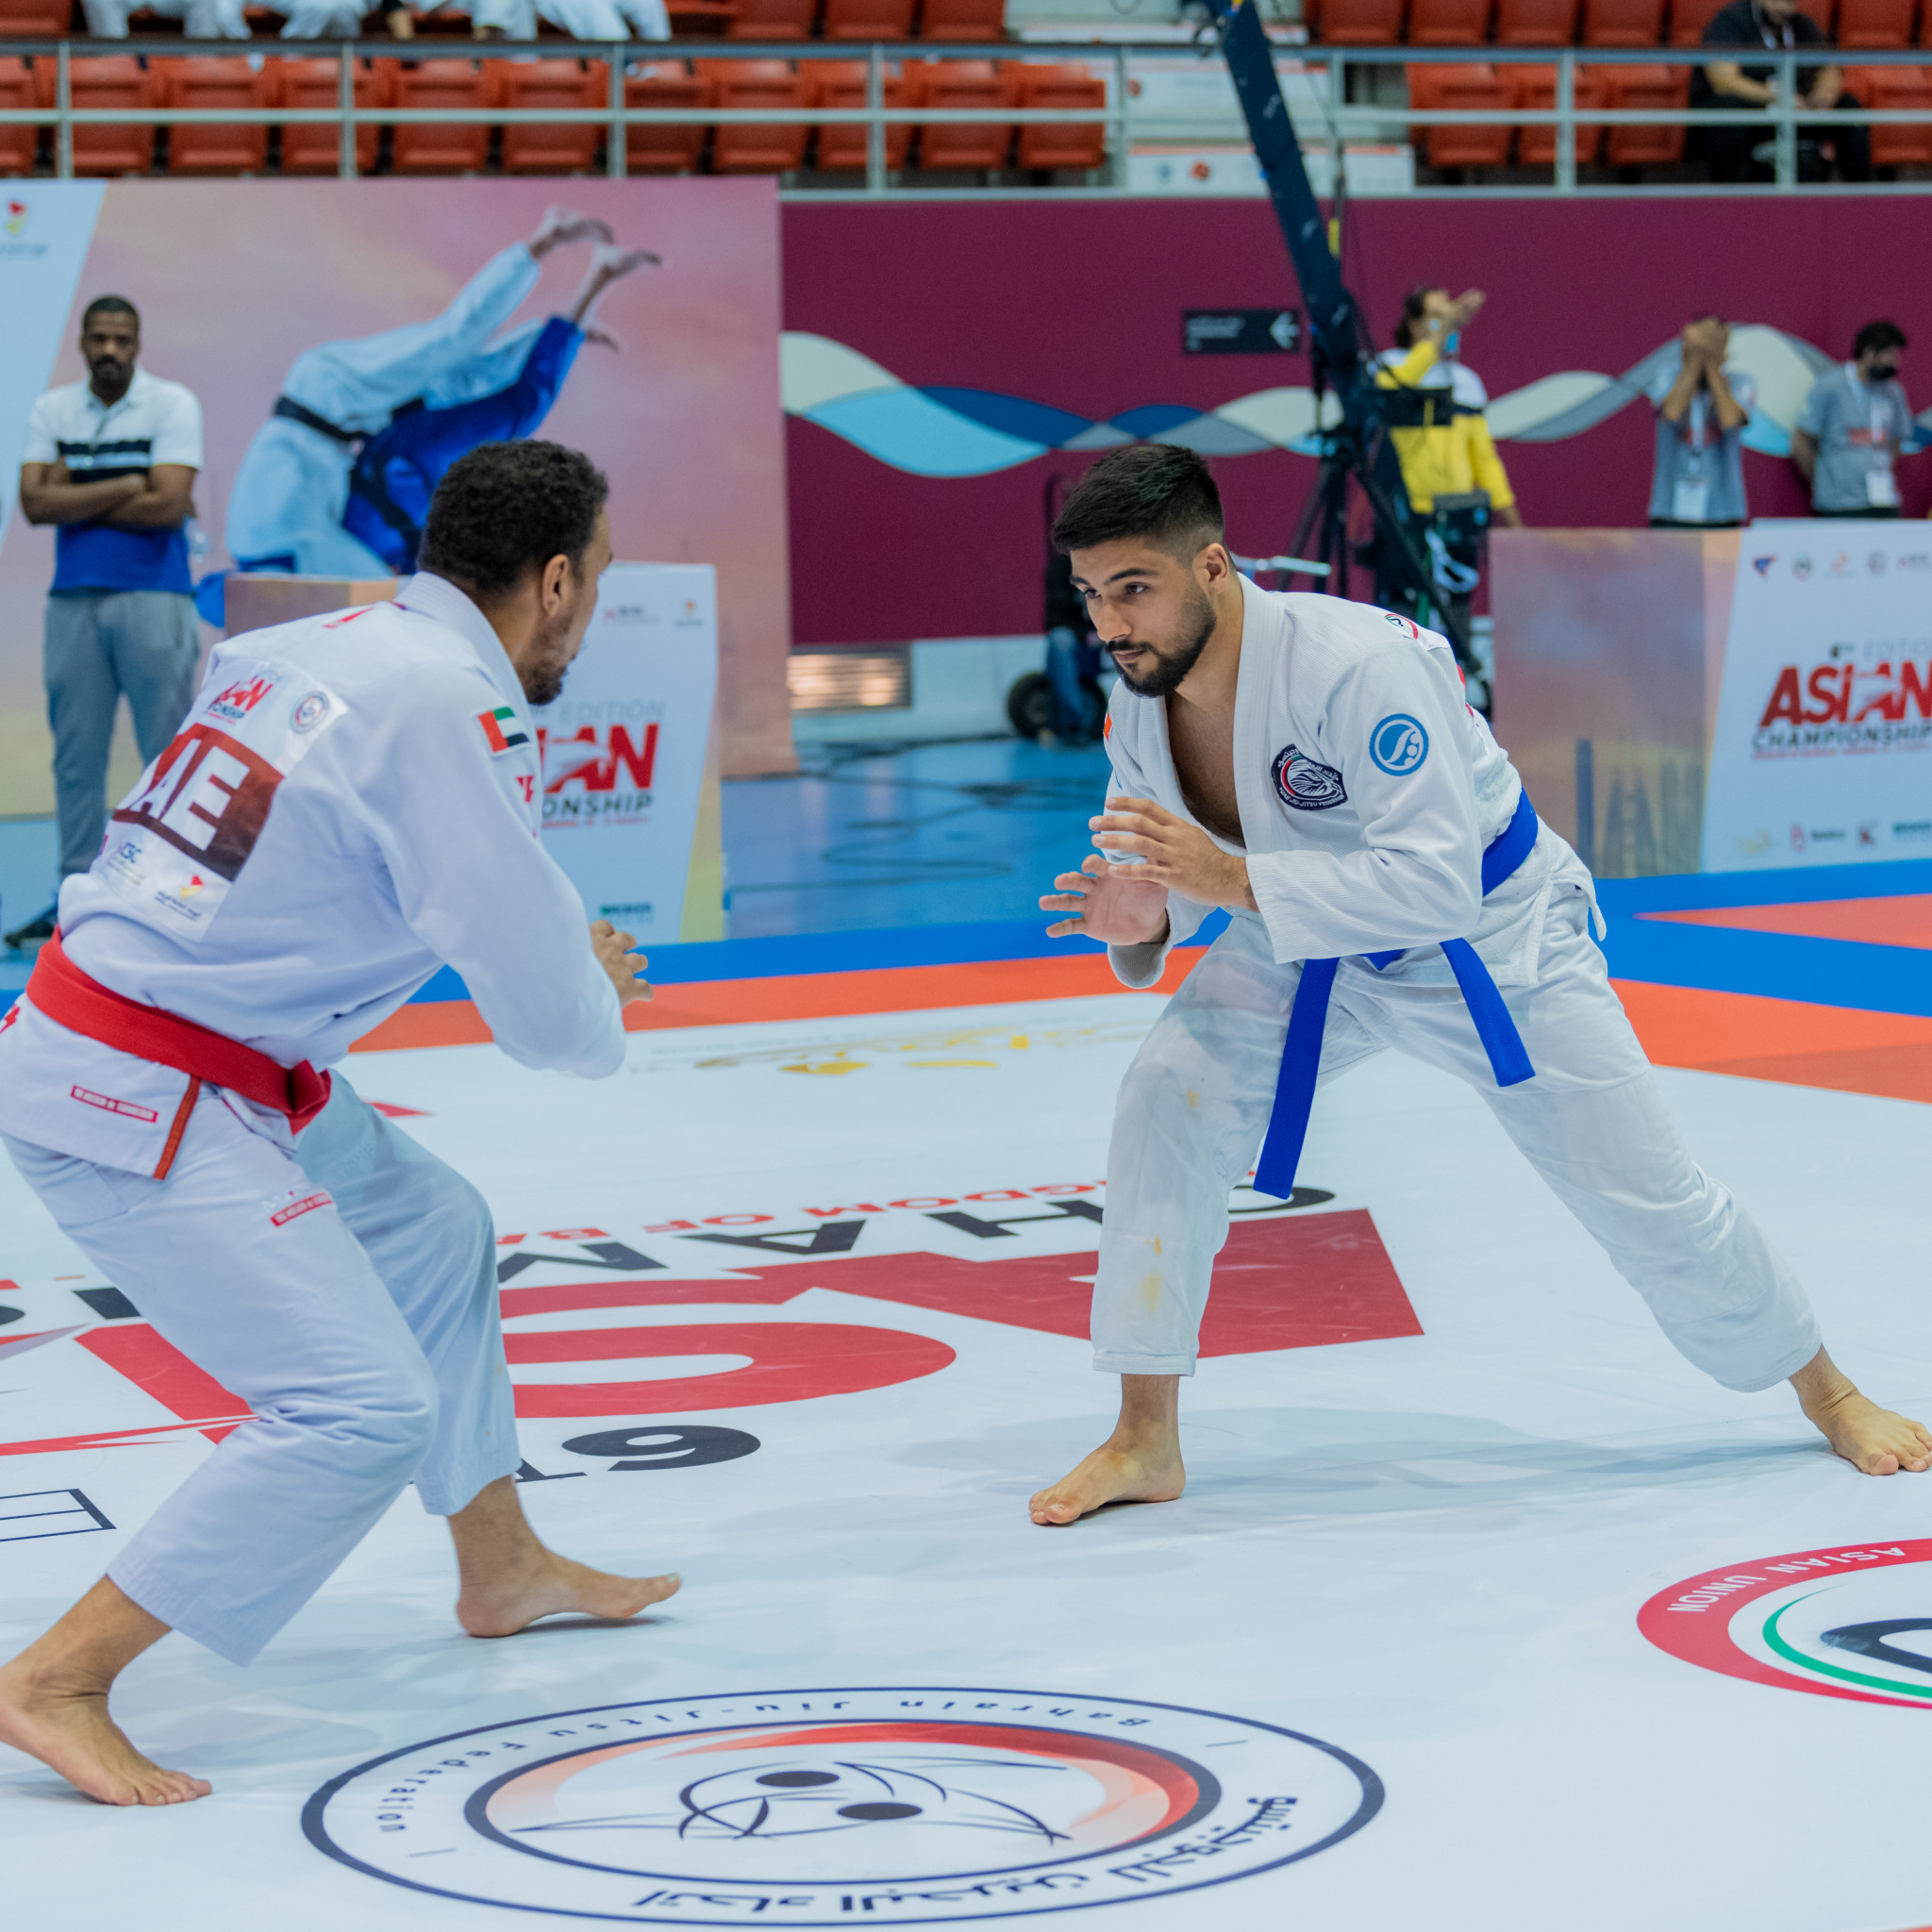 UAE lead medals table at Asian JuJitsu Championships after Opening